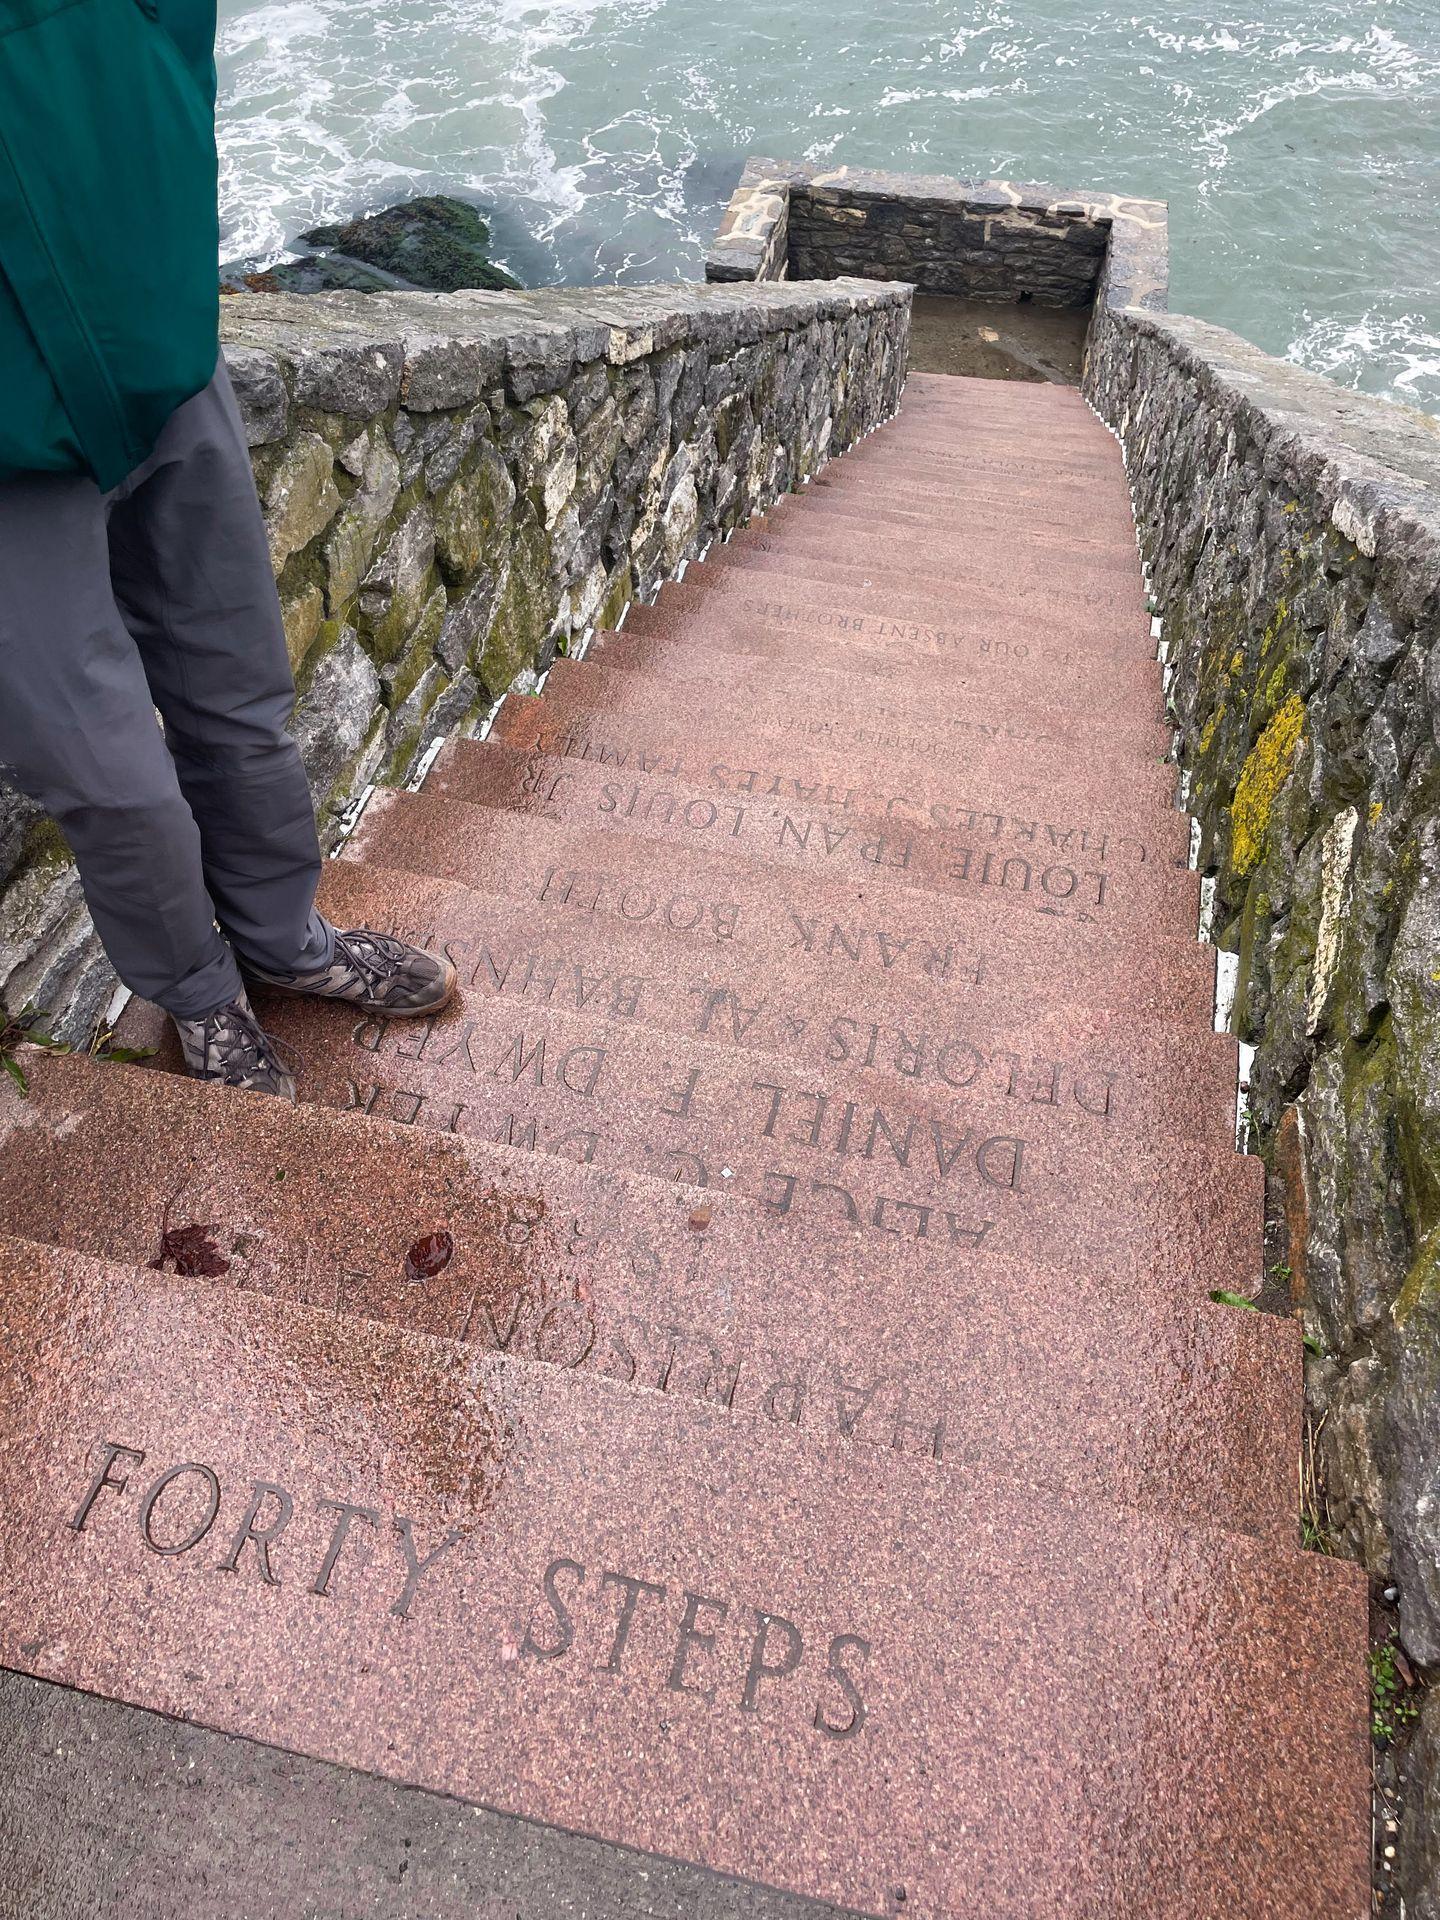 Looking down at reddish steps that leads down closer to the ocean. The top step reads 'Forty Steps'